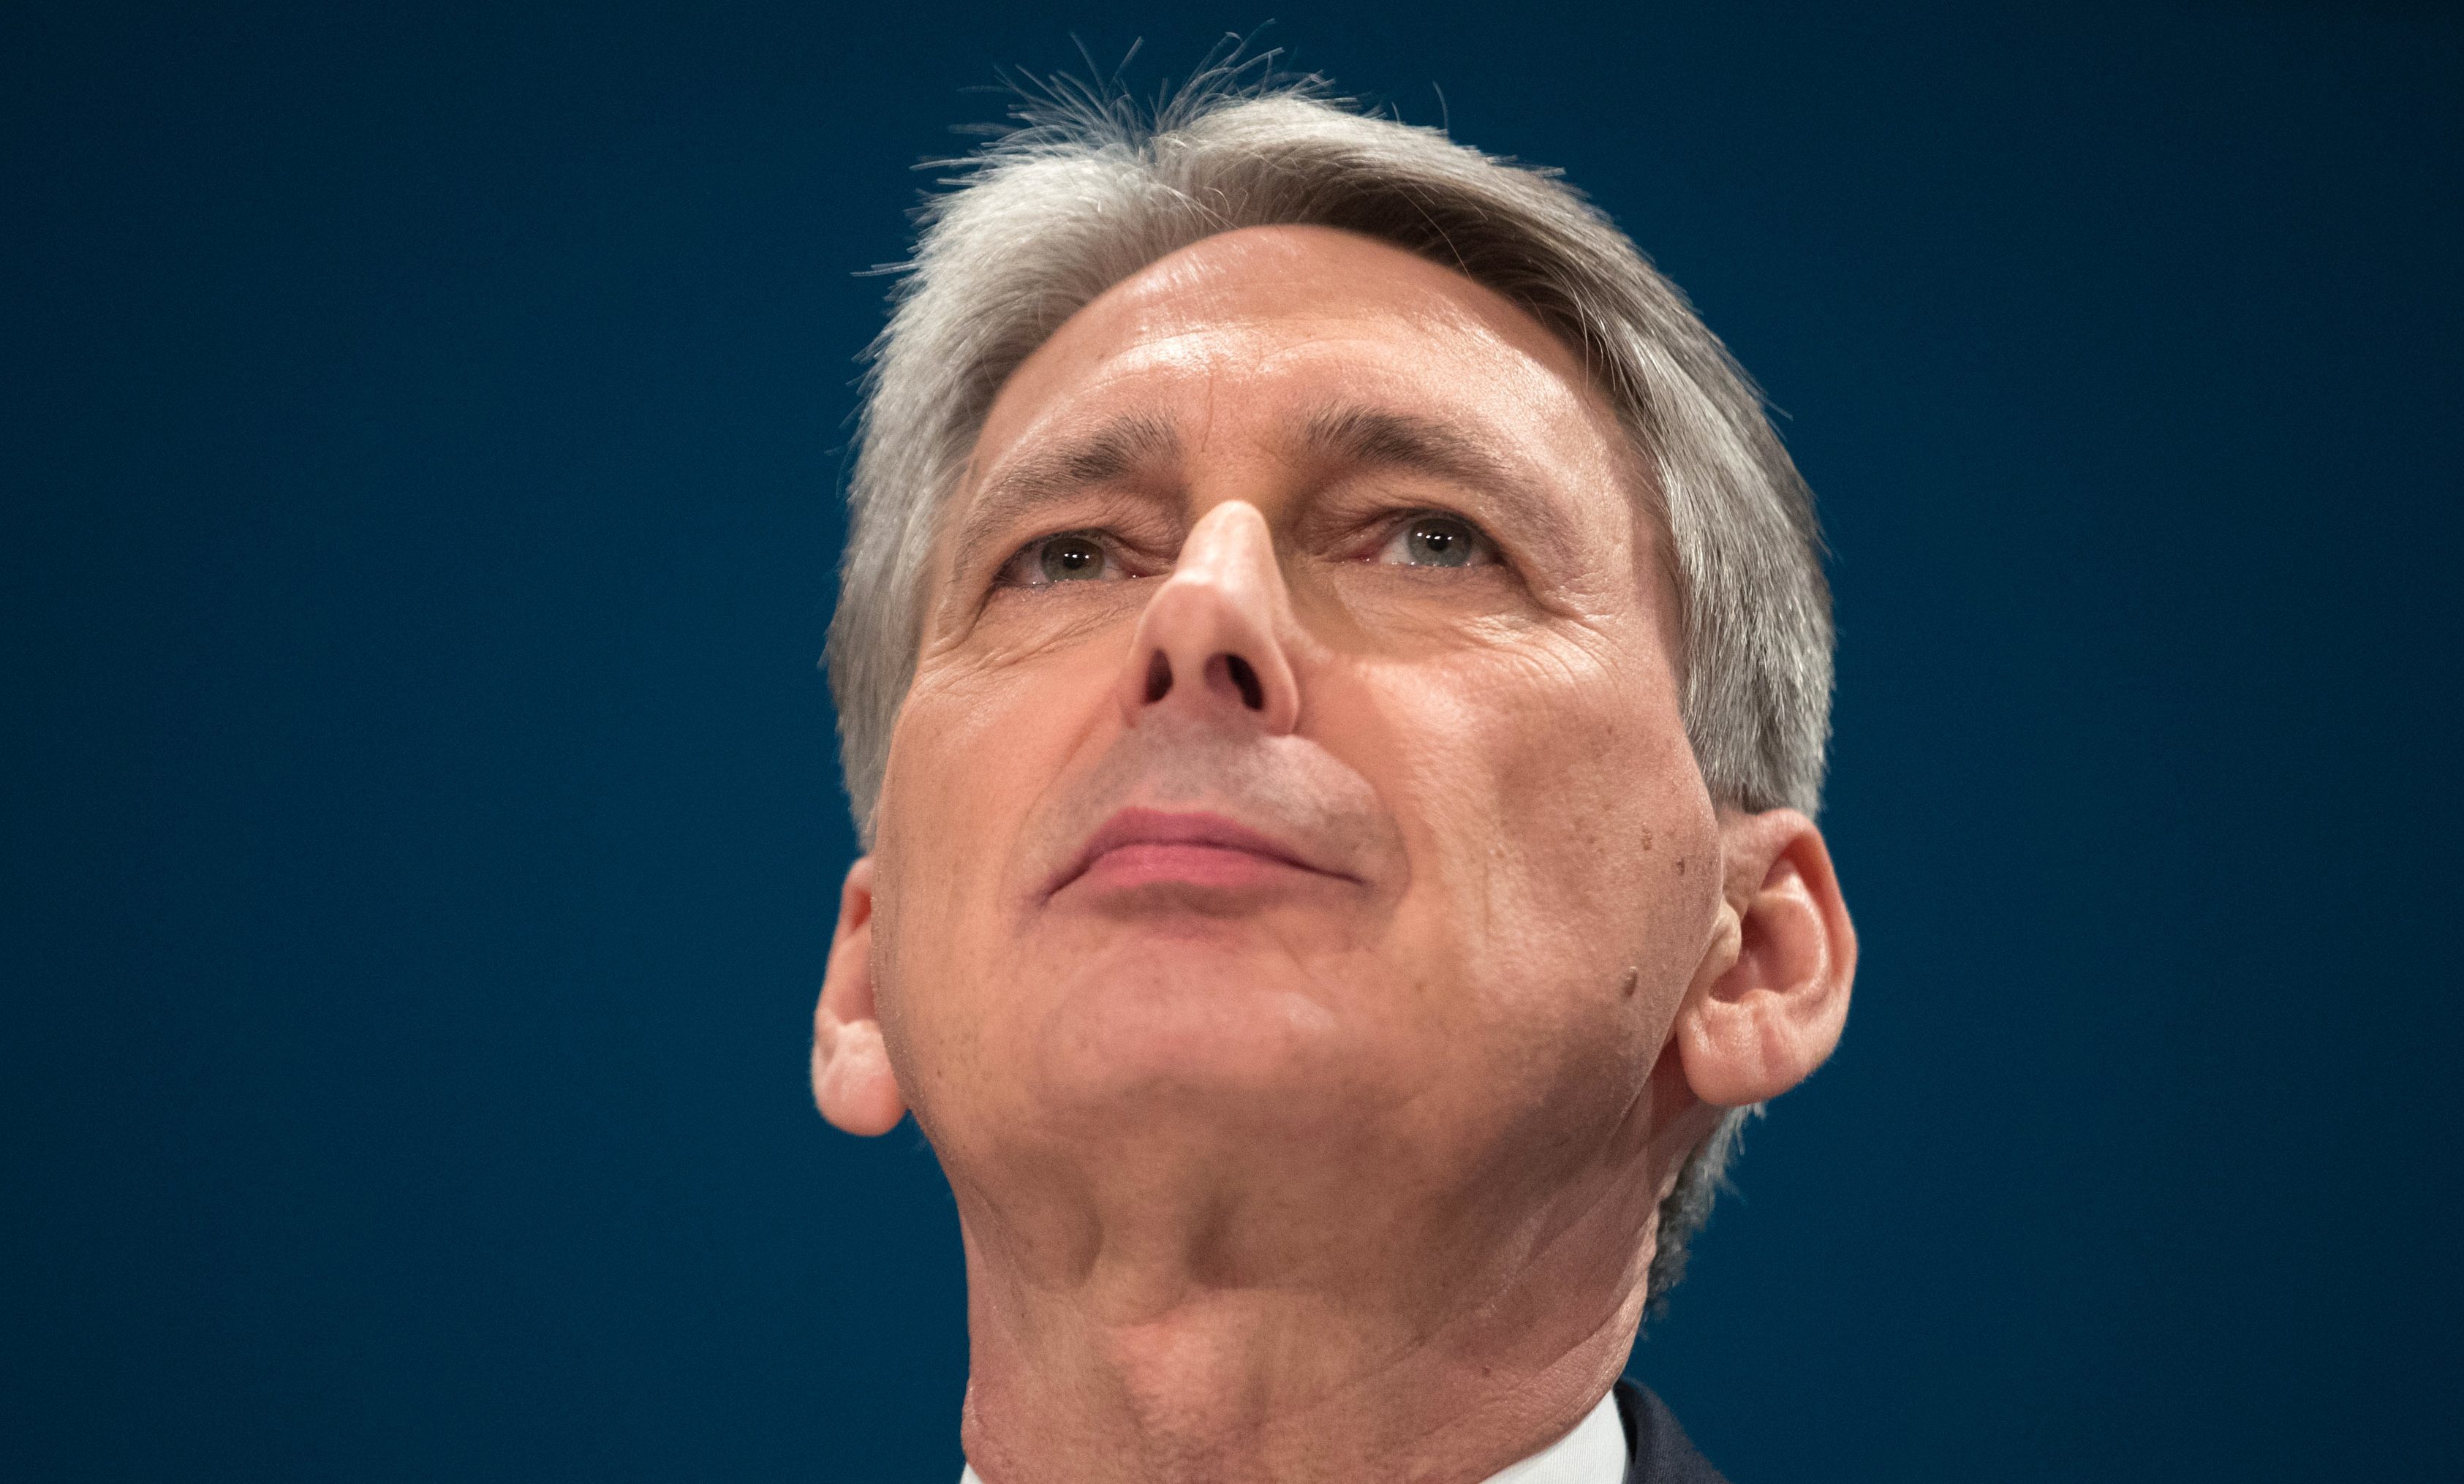 Philip Hammond delivers a speech on the economy during the second day of the Conservative Party Conference in Birmingham.